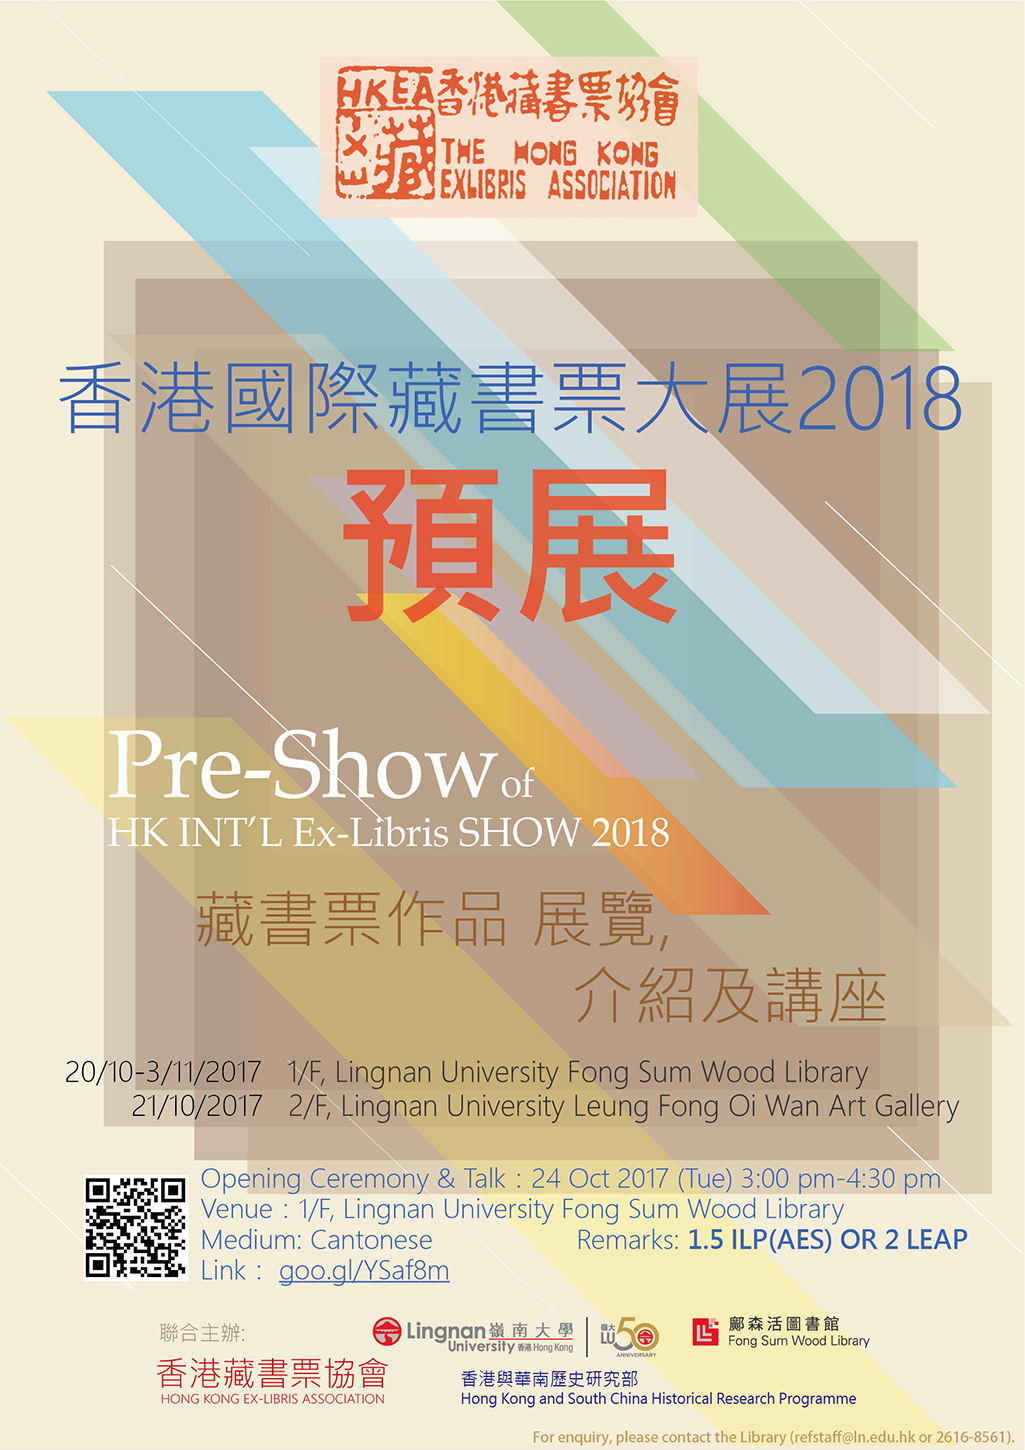 Opening Ceremony and seminar of Pre-Show of HK INT'L Ex-Libris SHOW 2018